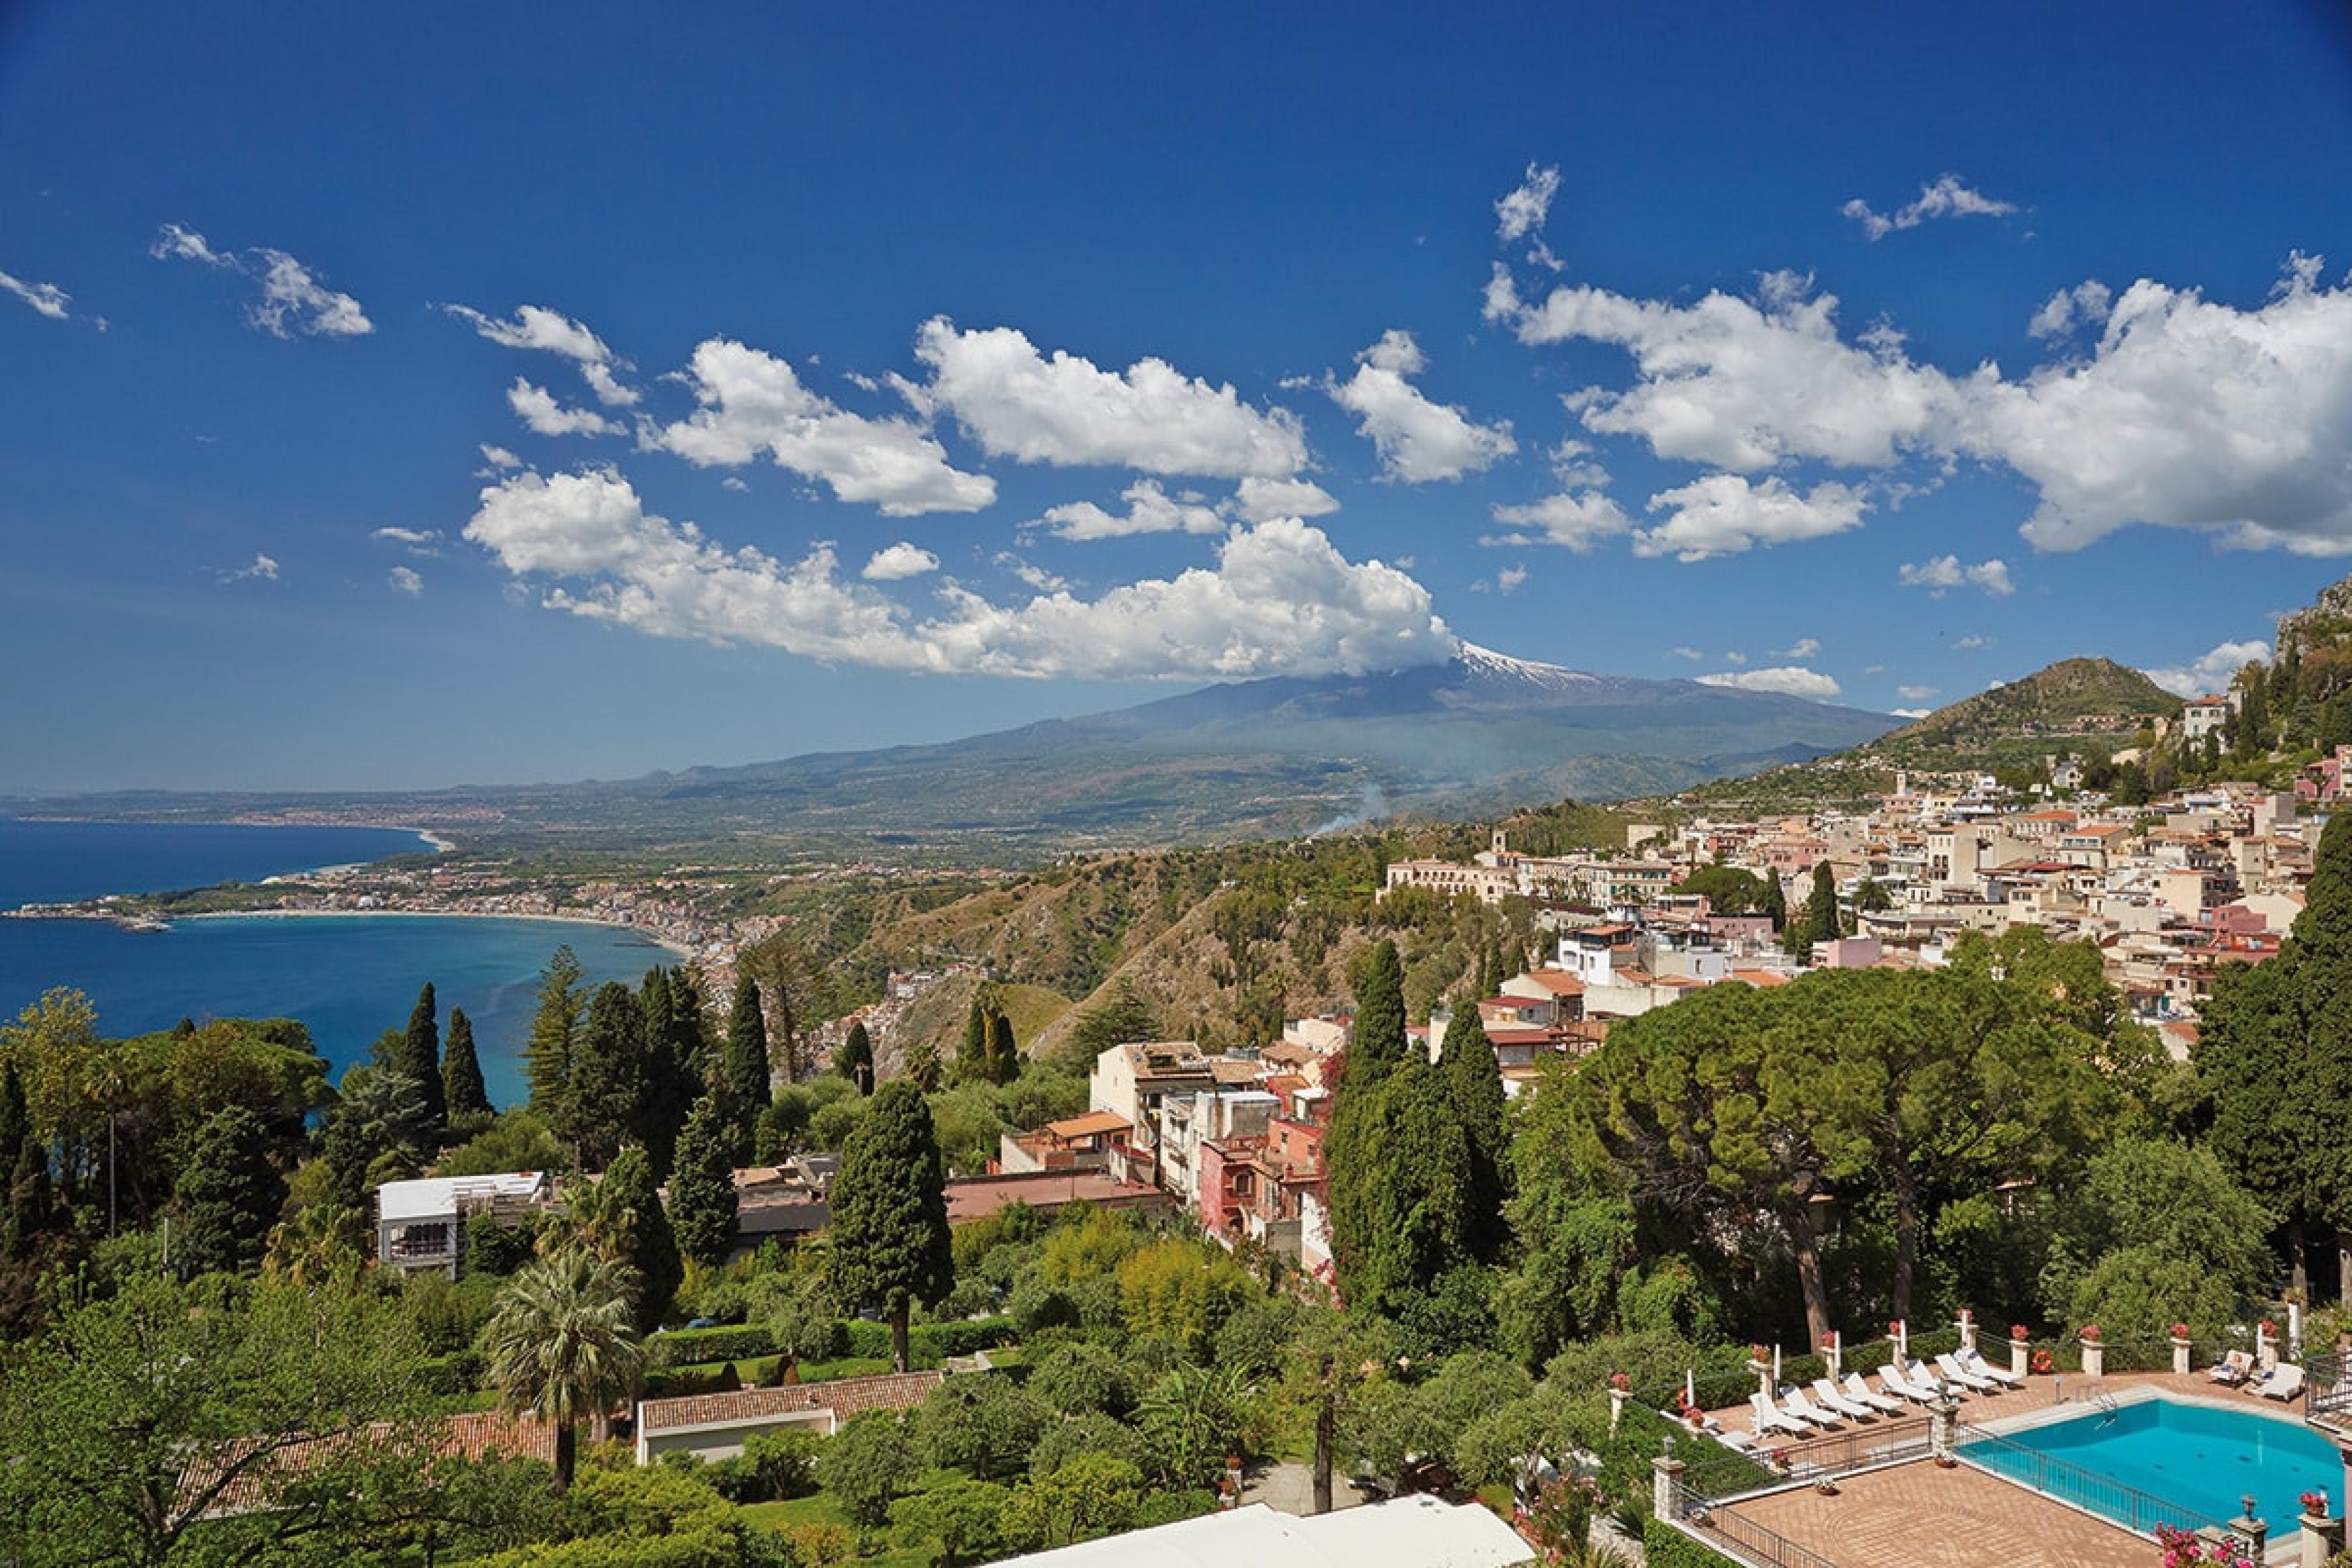 view over hotel grounds in sicily with pool to the right and aetna volcano in background